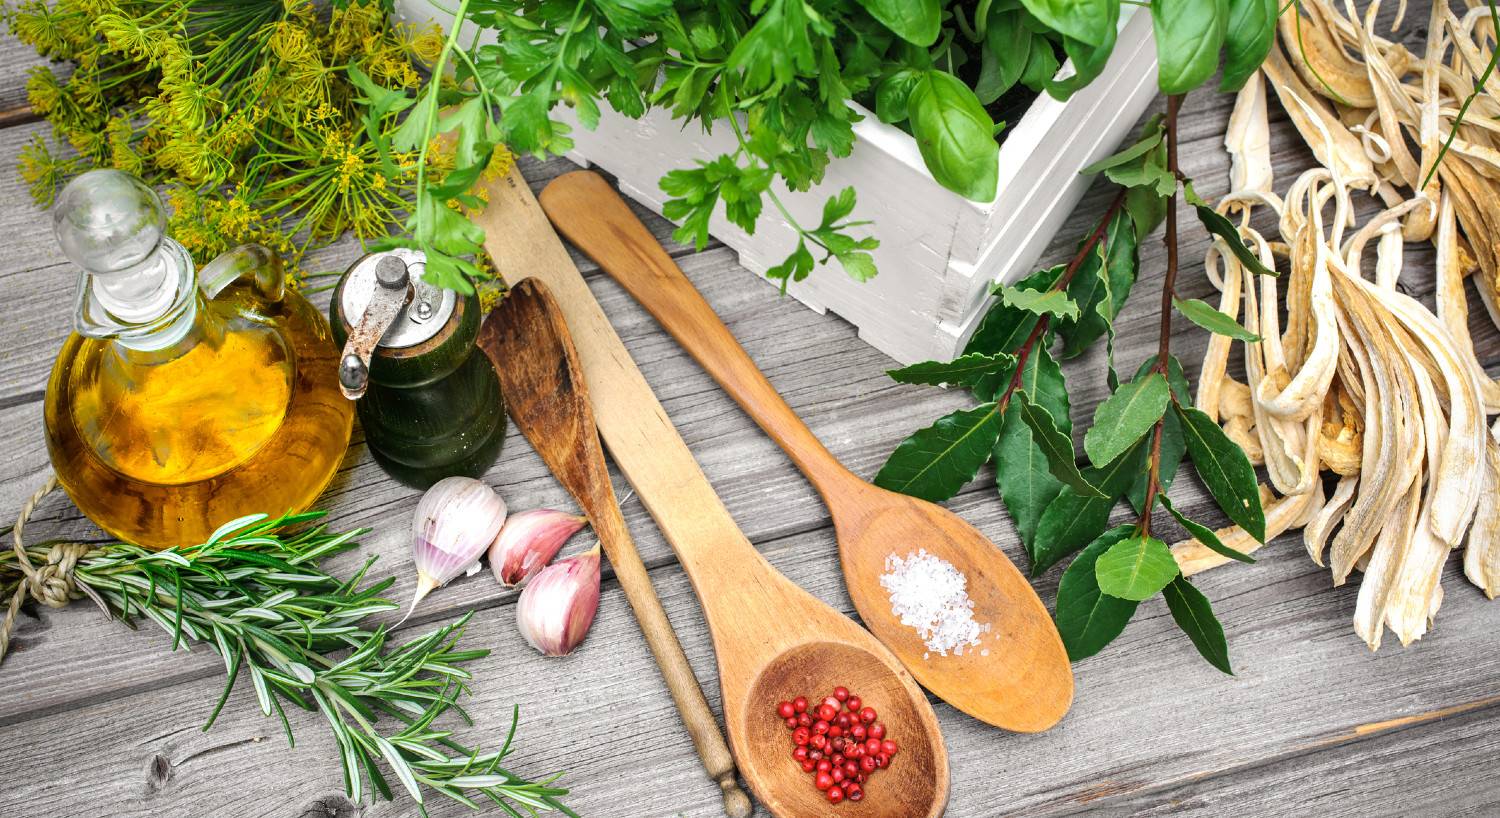 Wooden spoons on a wood table with green herbs and a pepper grinder. 